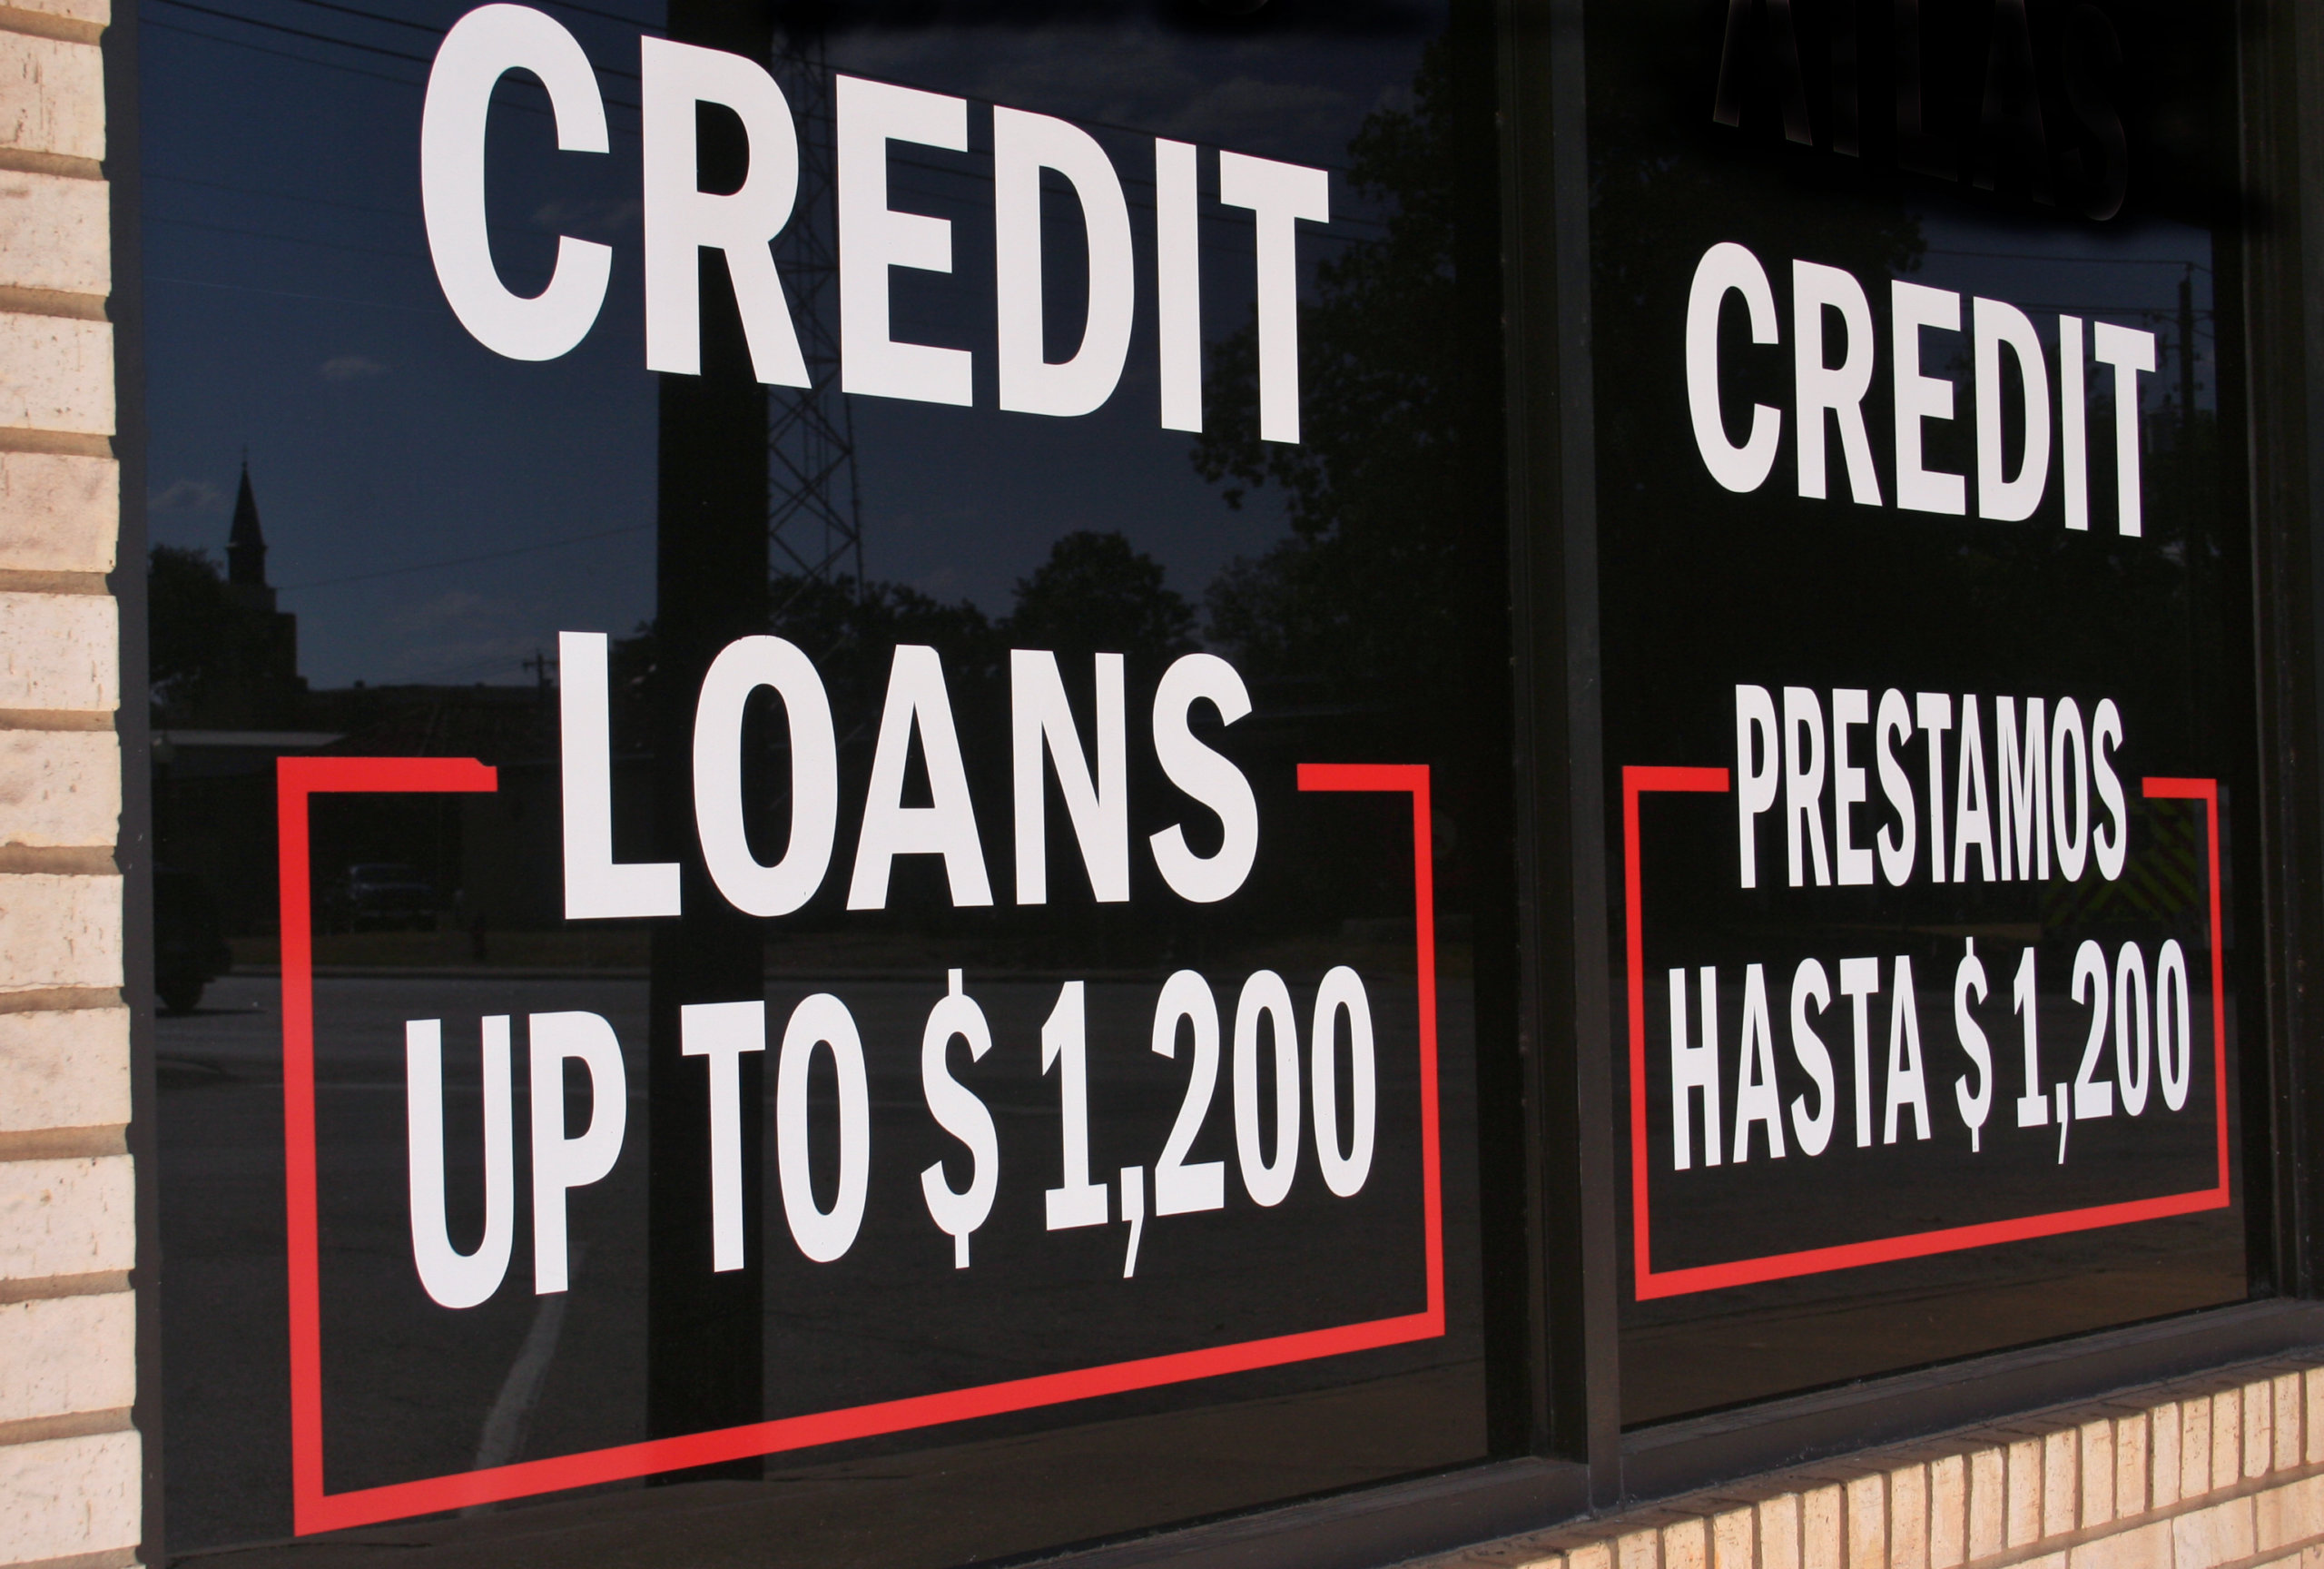 Ethics watchdog issues report on payday loan industry lobbying